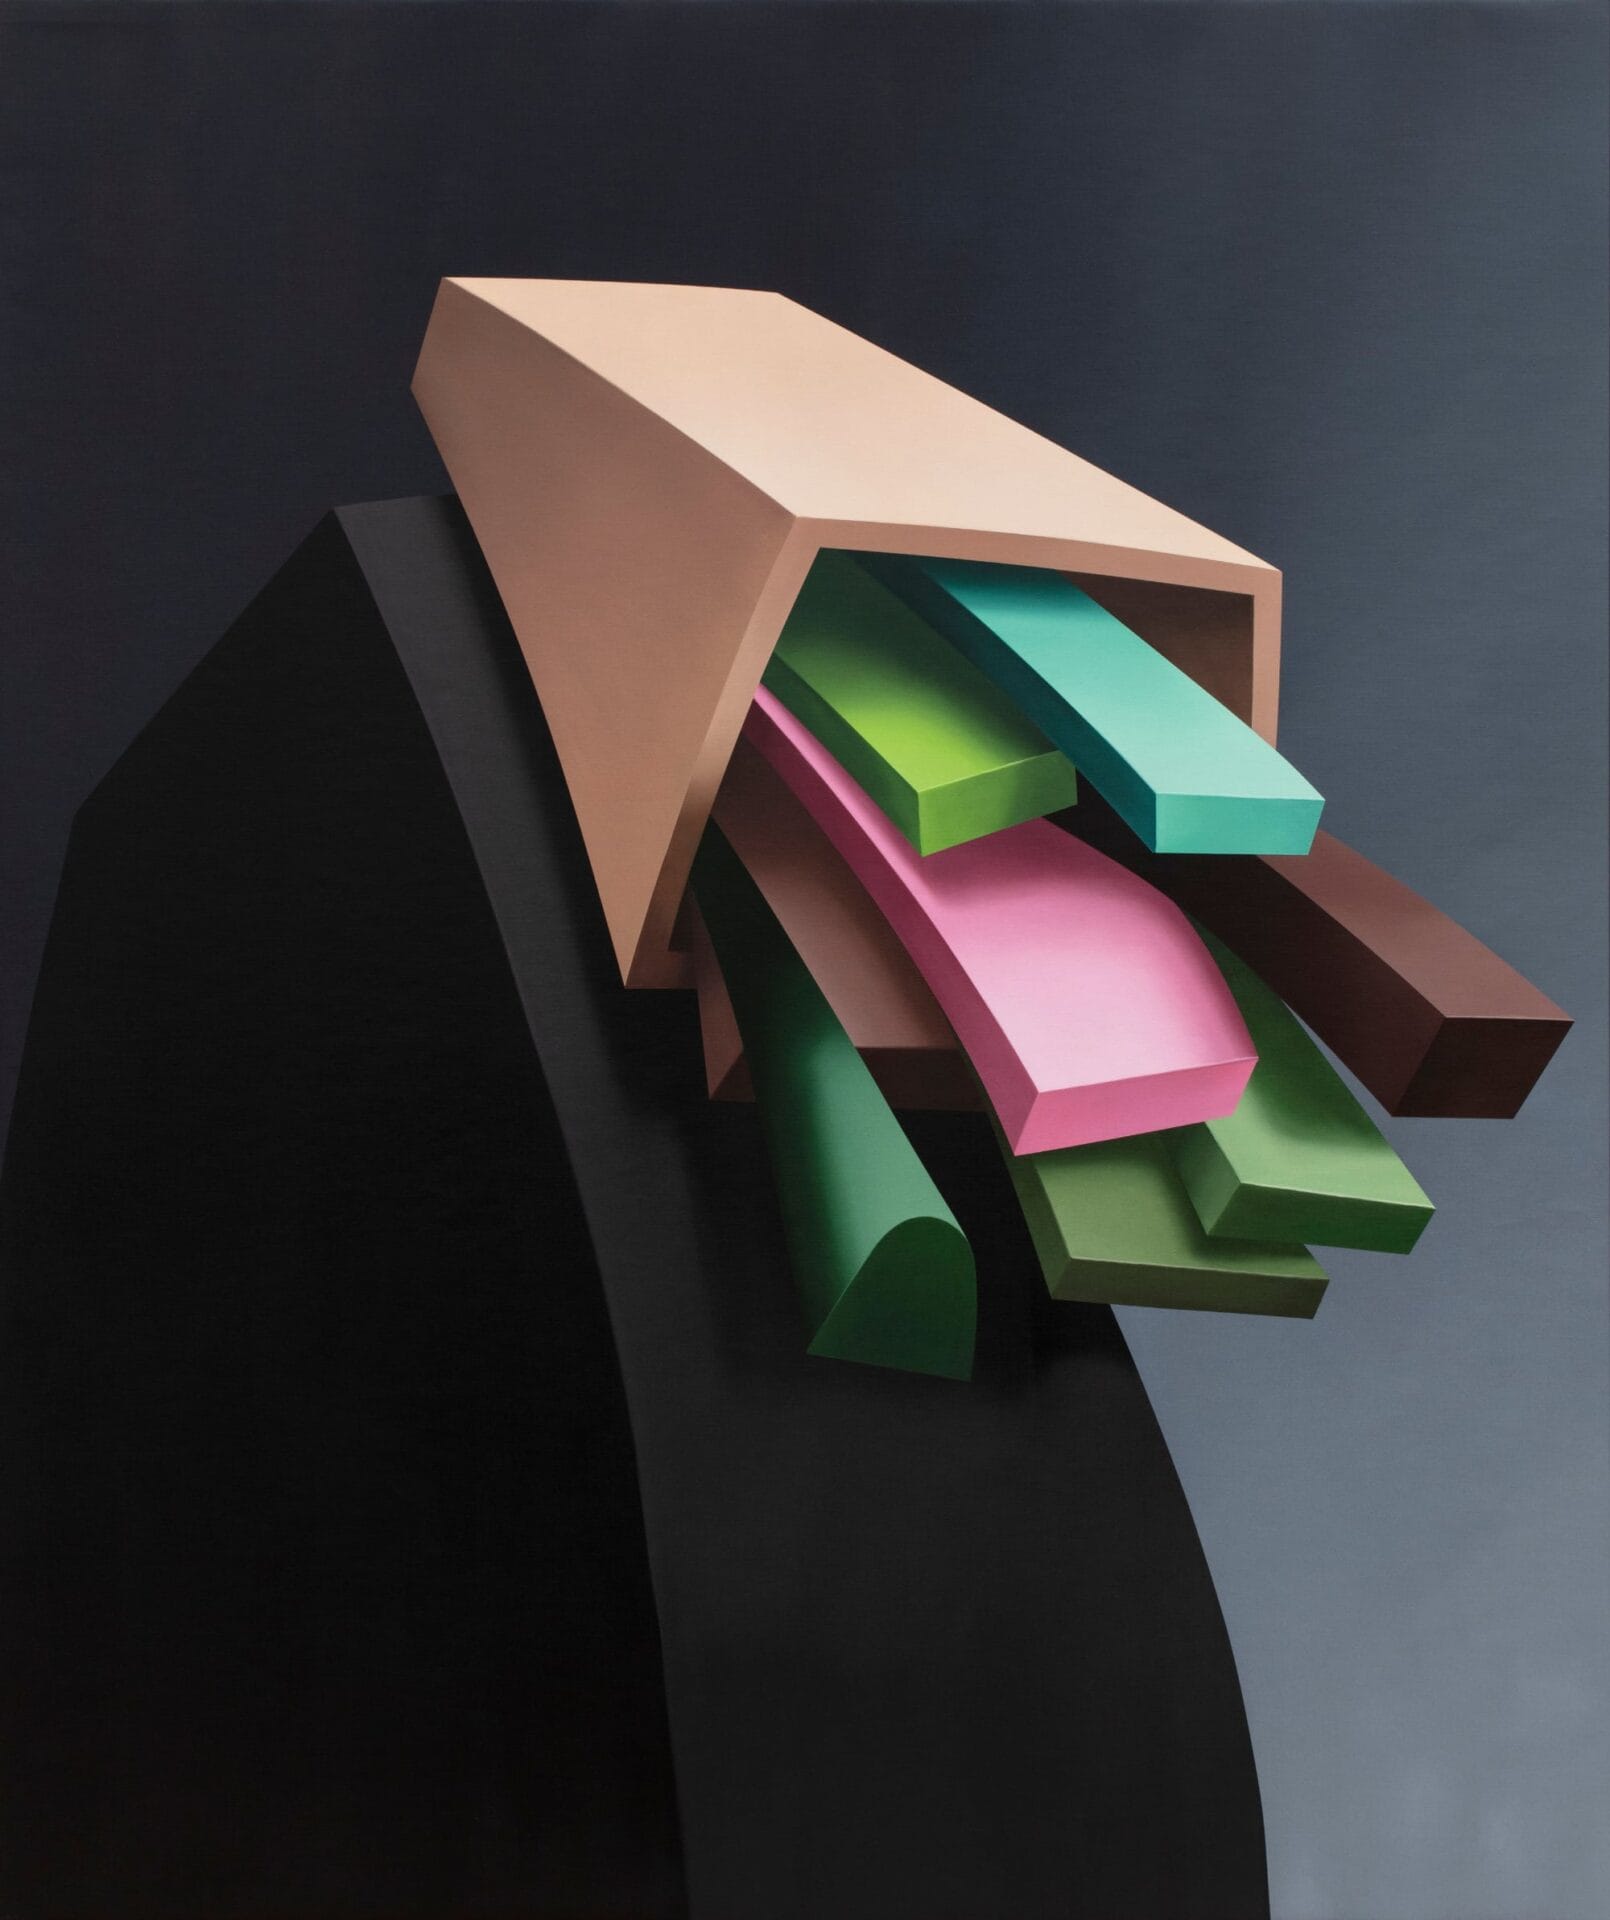 an abstract portrait of a figure painted chunky, colorful shapes including blue, green, and pink bars for a head